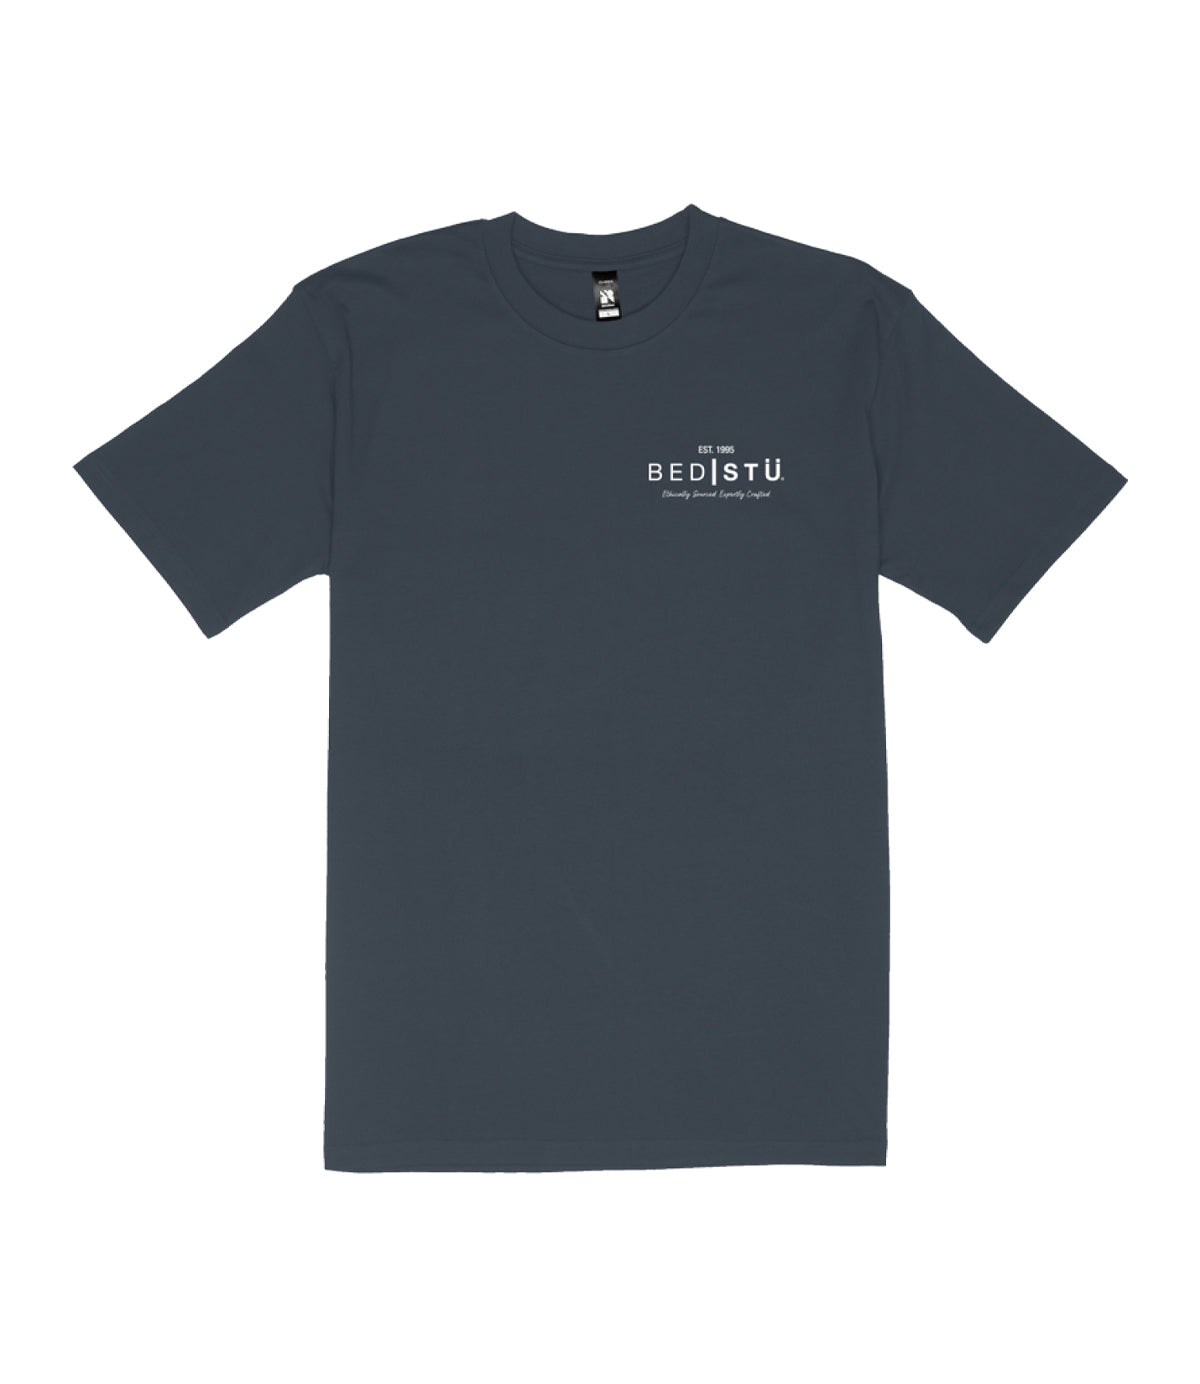 Plain dark gray Bed Stu Classic Tee with the logo on the chest, made from ethically sourced materials.